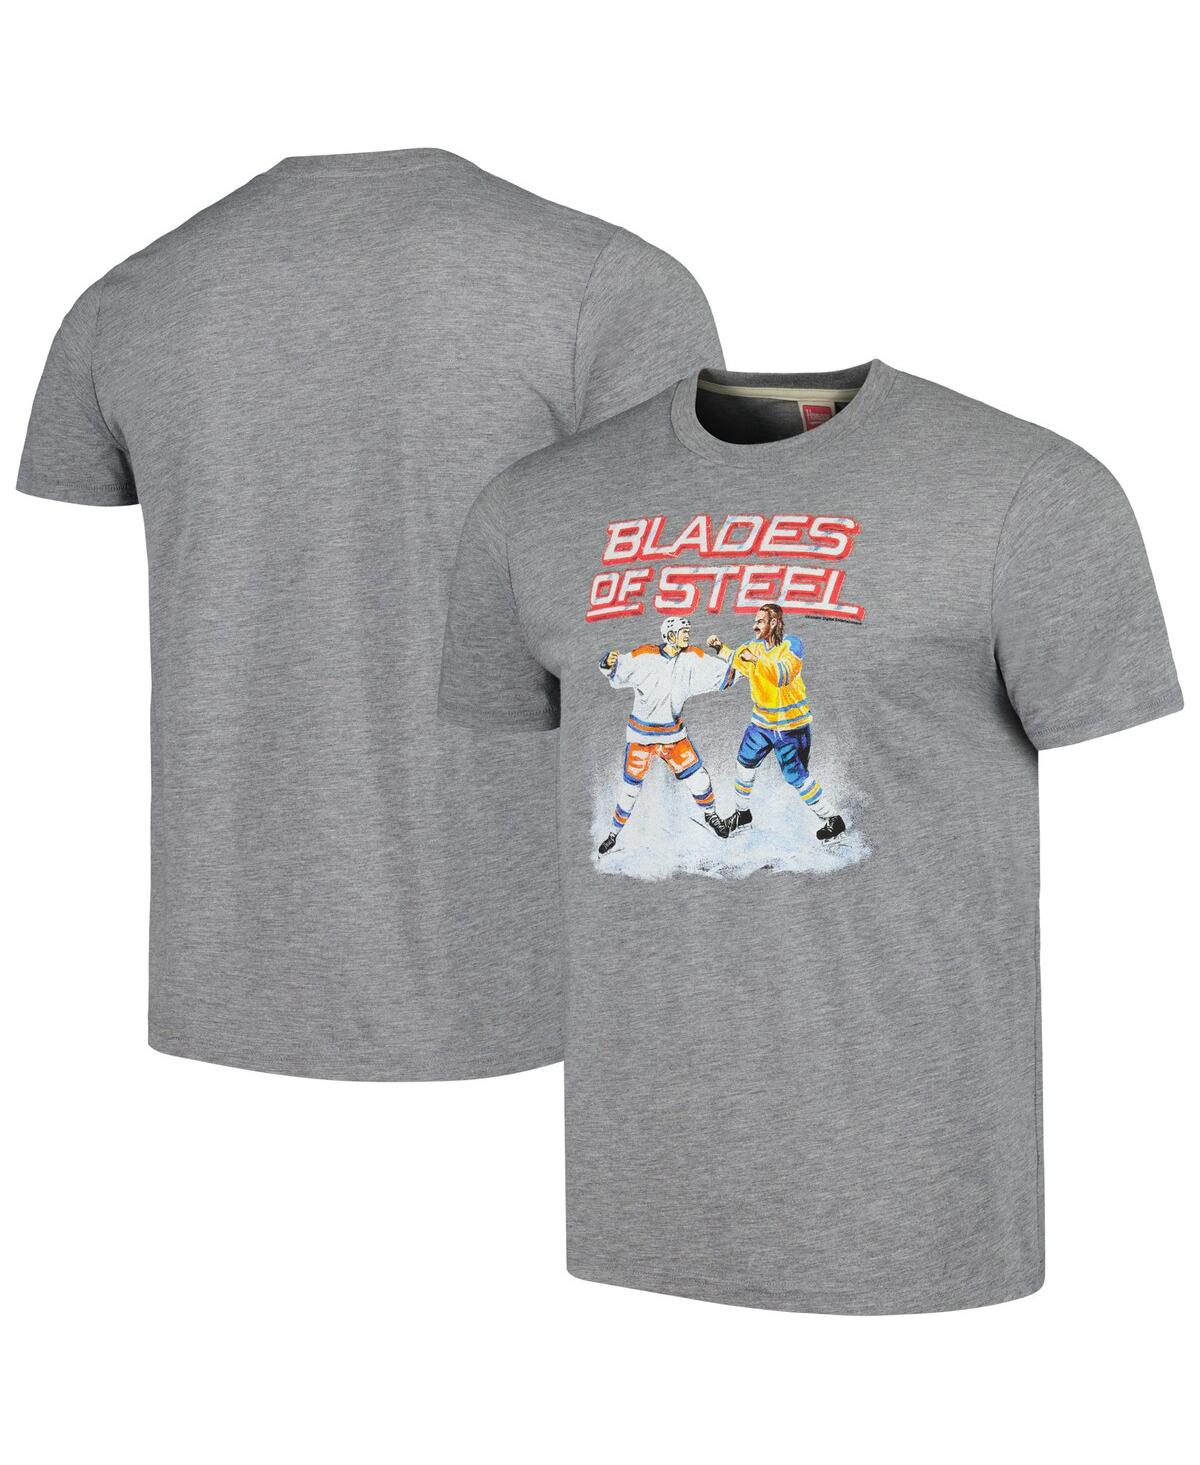 Men's and Women's Homage Gray Blades of Steel Tri-Blend T-shirt - Gray